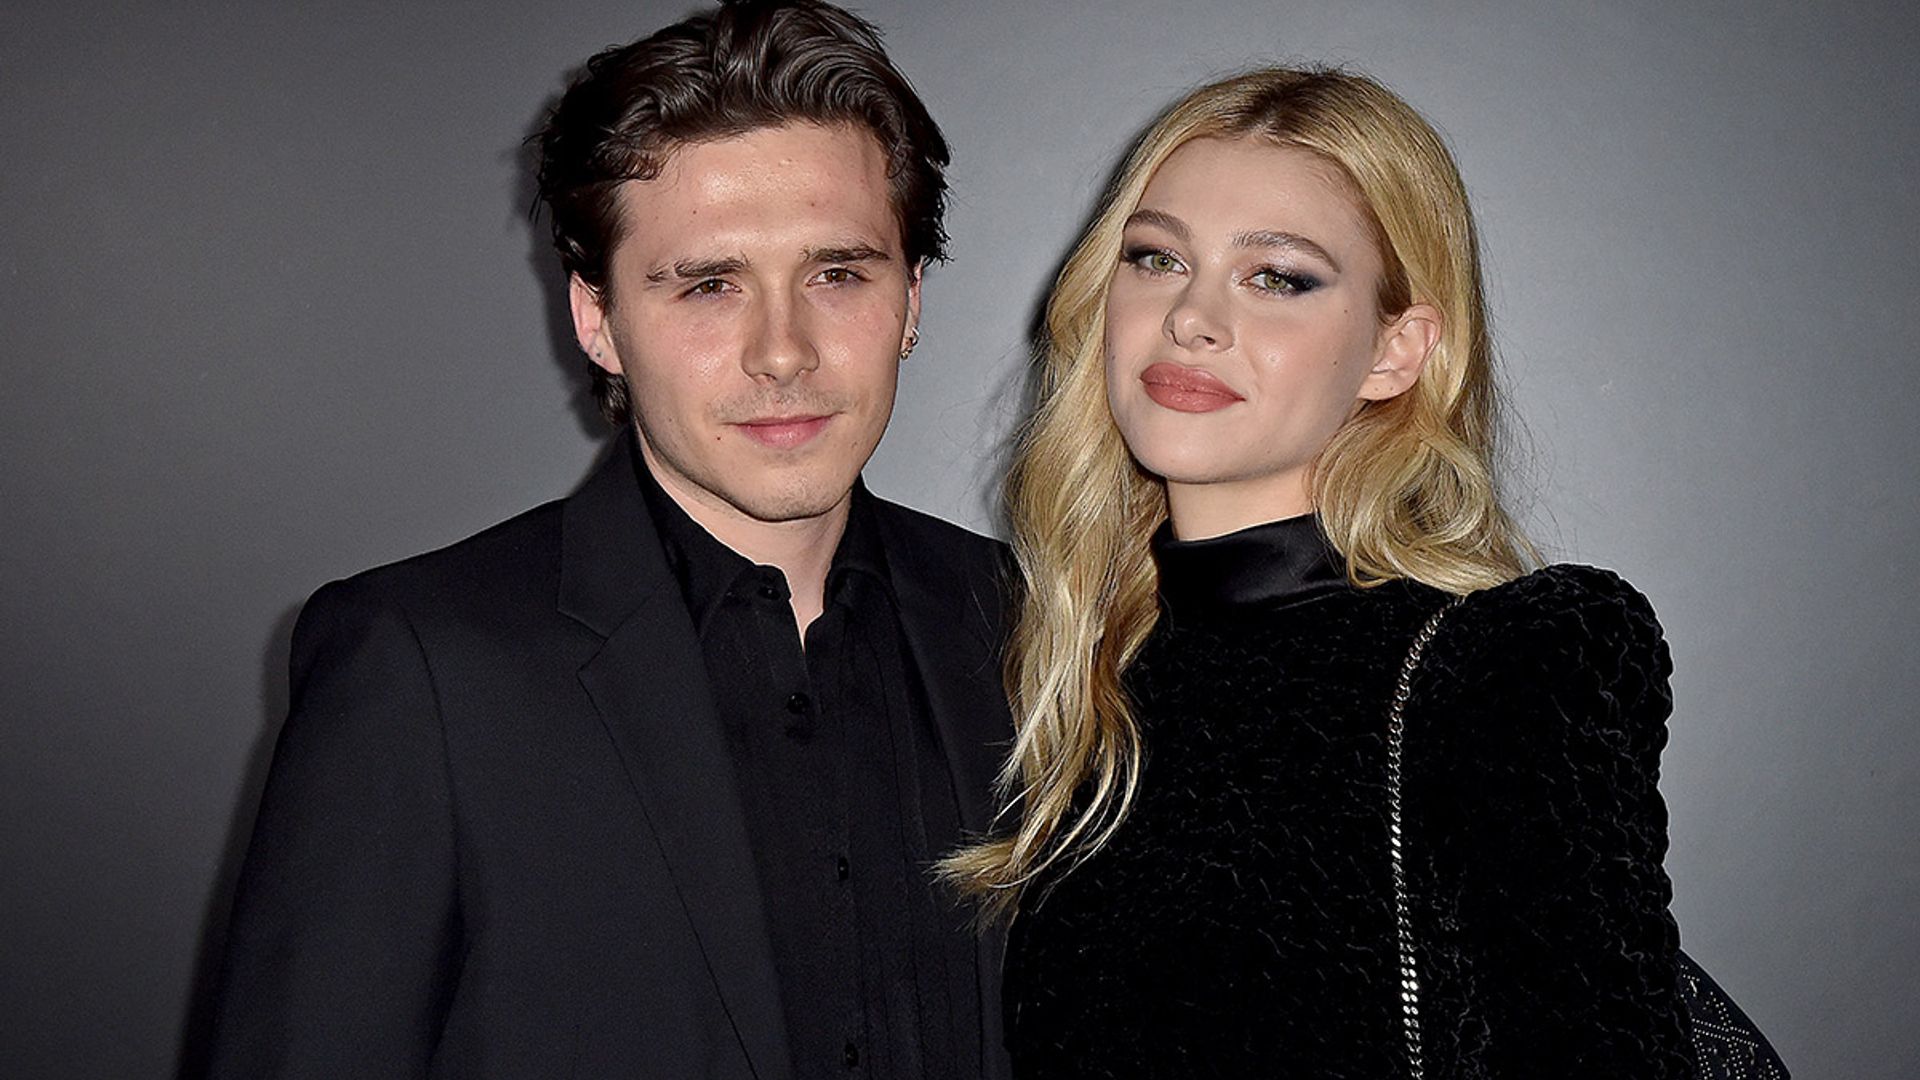 Brooklyn Beckham and Nicola Peltz's living room inside $10.5m home is not what we expected